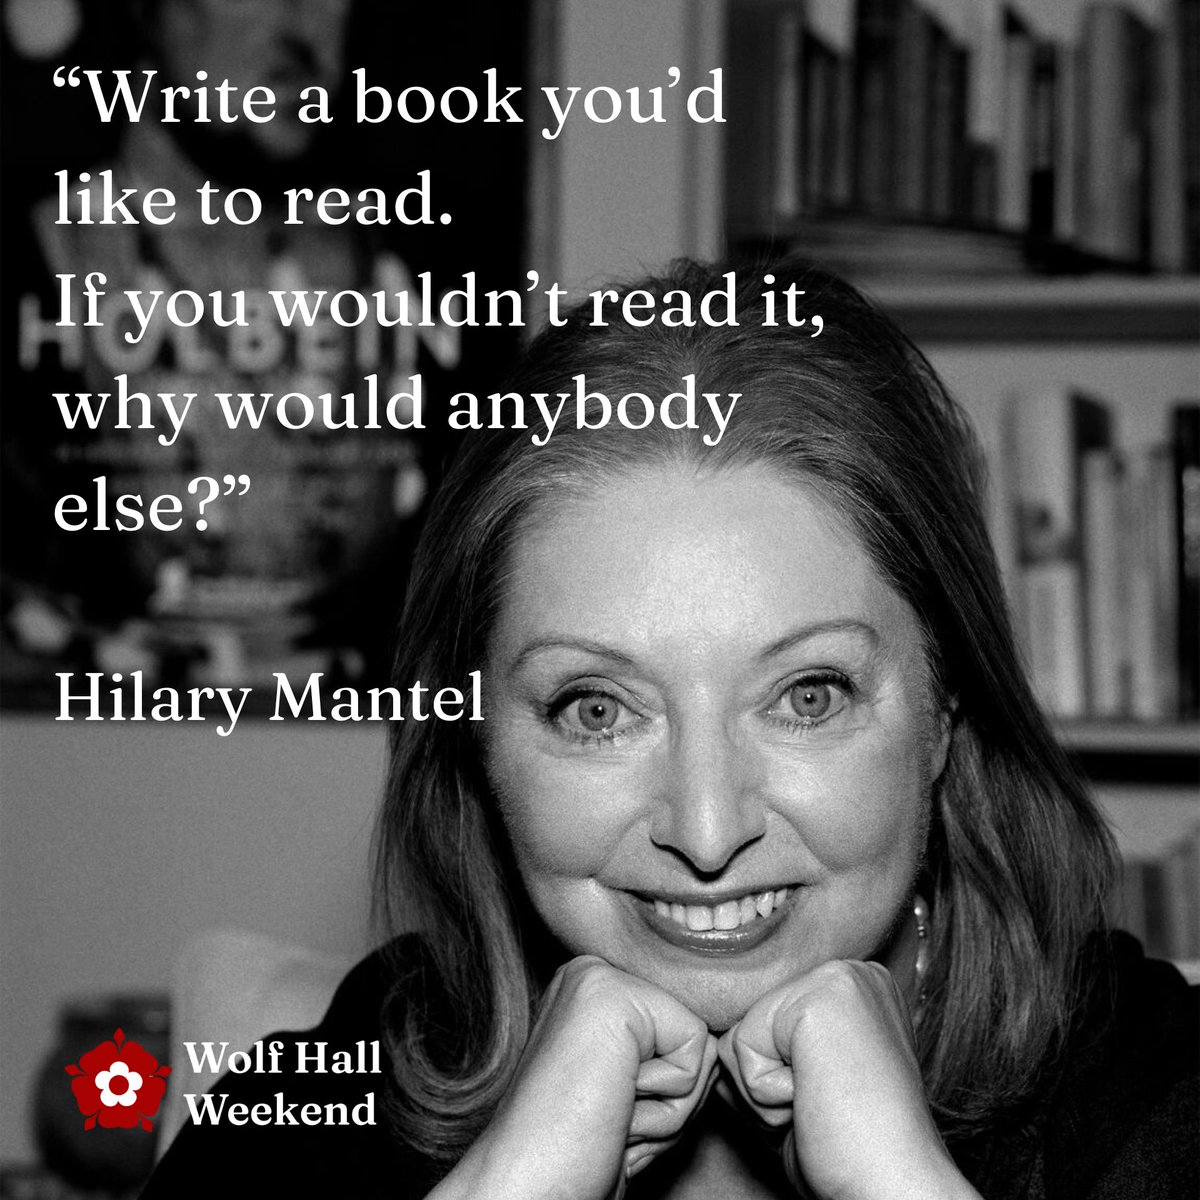 “Write a book you’d like to read. If you wouldn’t read it, why would anybody else?' Hilary Mantel wolfhallweekend.com

#History #WolfHall #TudorHistory #AnneBoleyn #tudors #writerscommunity #Books #Exeter #Devon #books  #writersclub #History